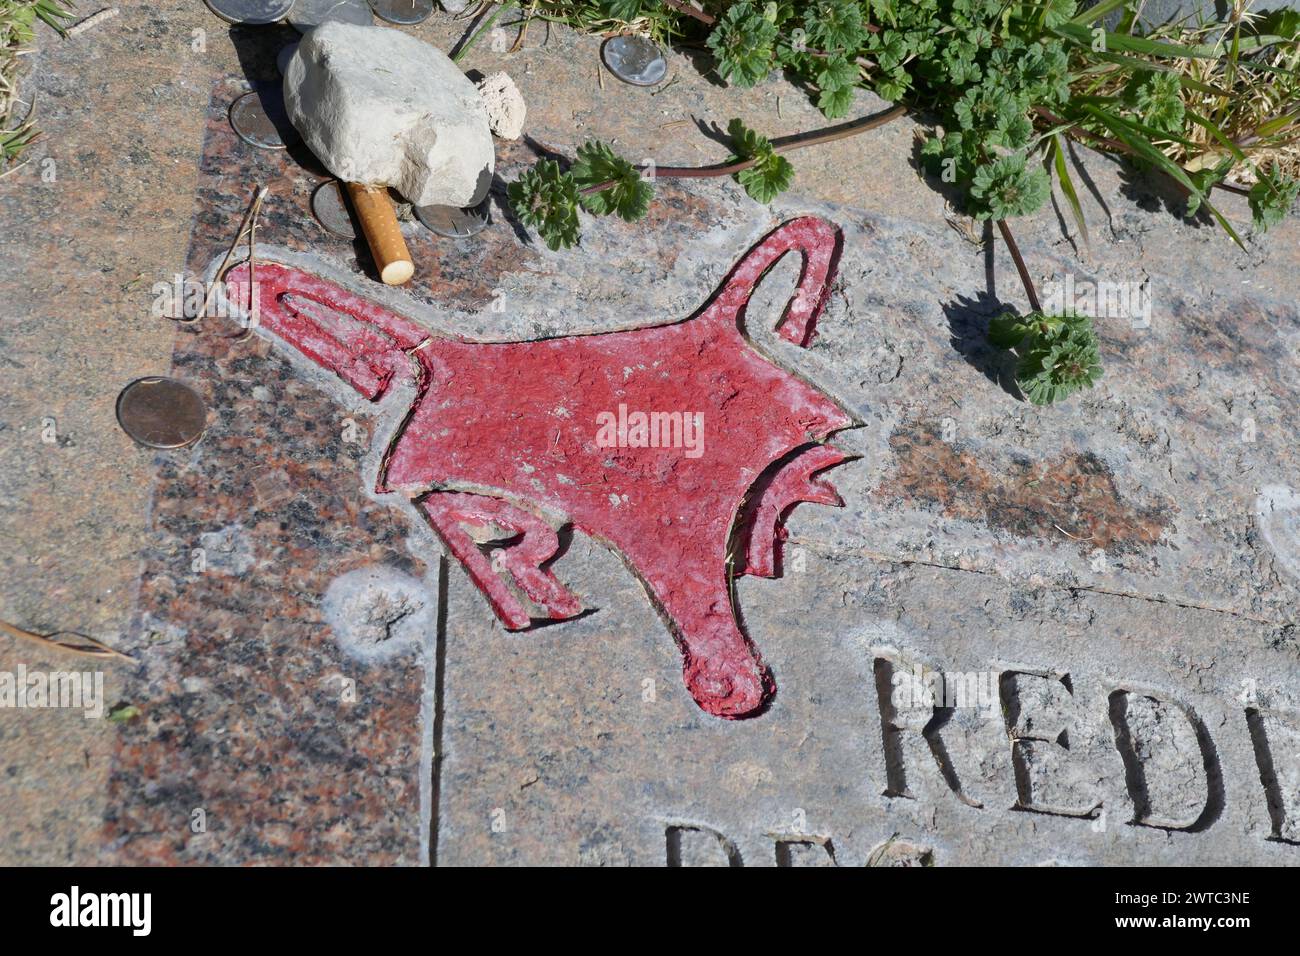 Las Vegas, Nevada, USA 8th March 2024 Actor Redd Foxx Grave in Devotion Section at Palm Memorial Park on March 8, 2024 in Las Vegas, Nevada, USA. Photo by Barry King/Alamy Stock Photo Stock Photo